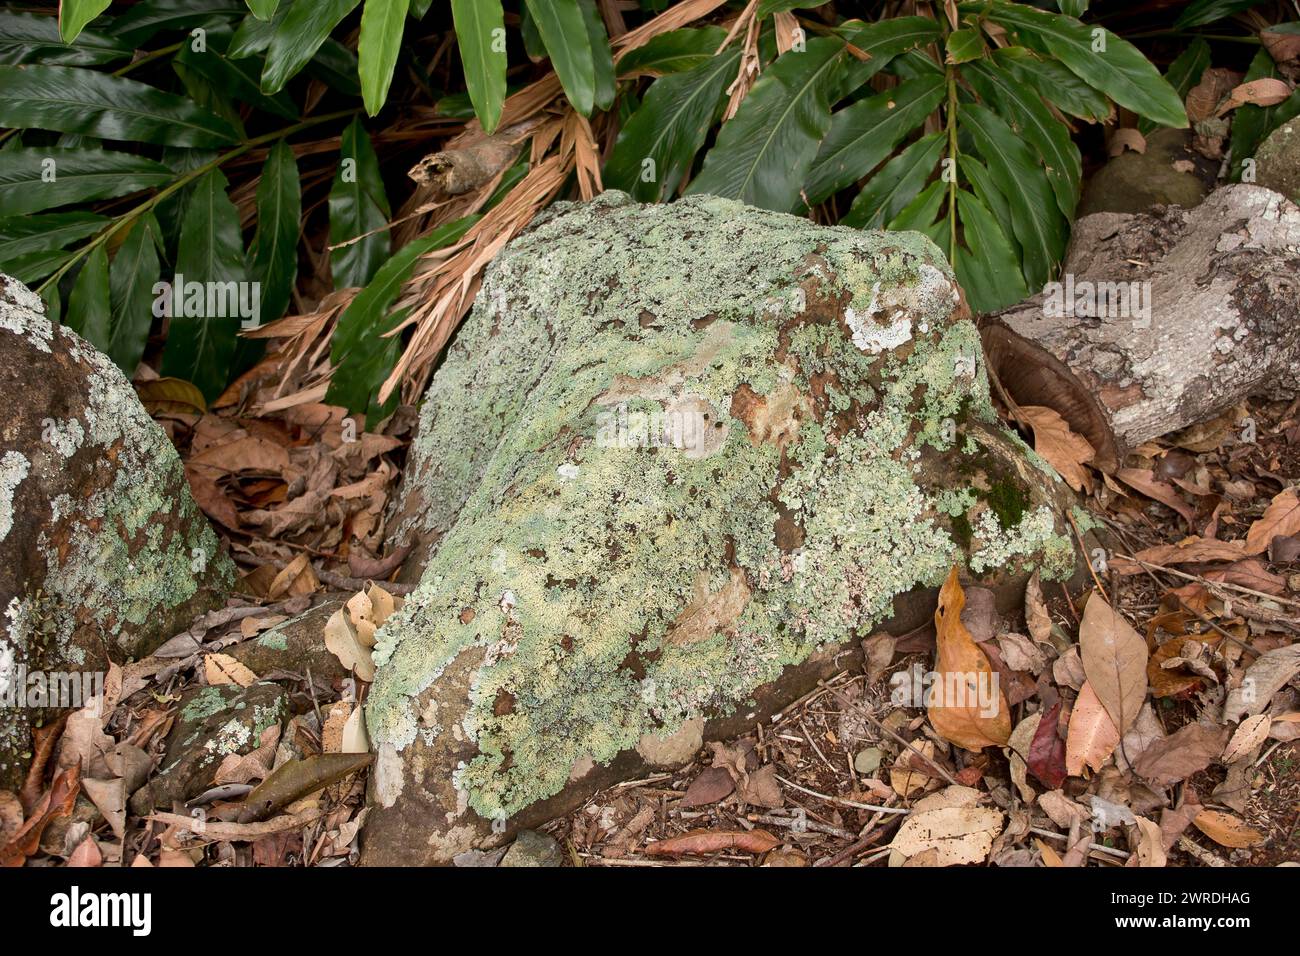 Basalt boulders on floor of sub-tropical rainforest in Queensland, Australia. Rocks almost completely covered in pale green and white lichens. Stock Photo